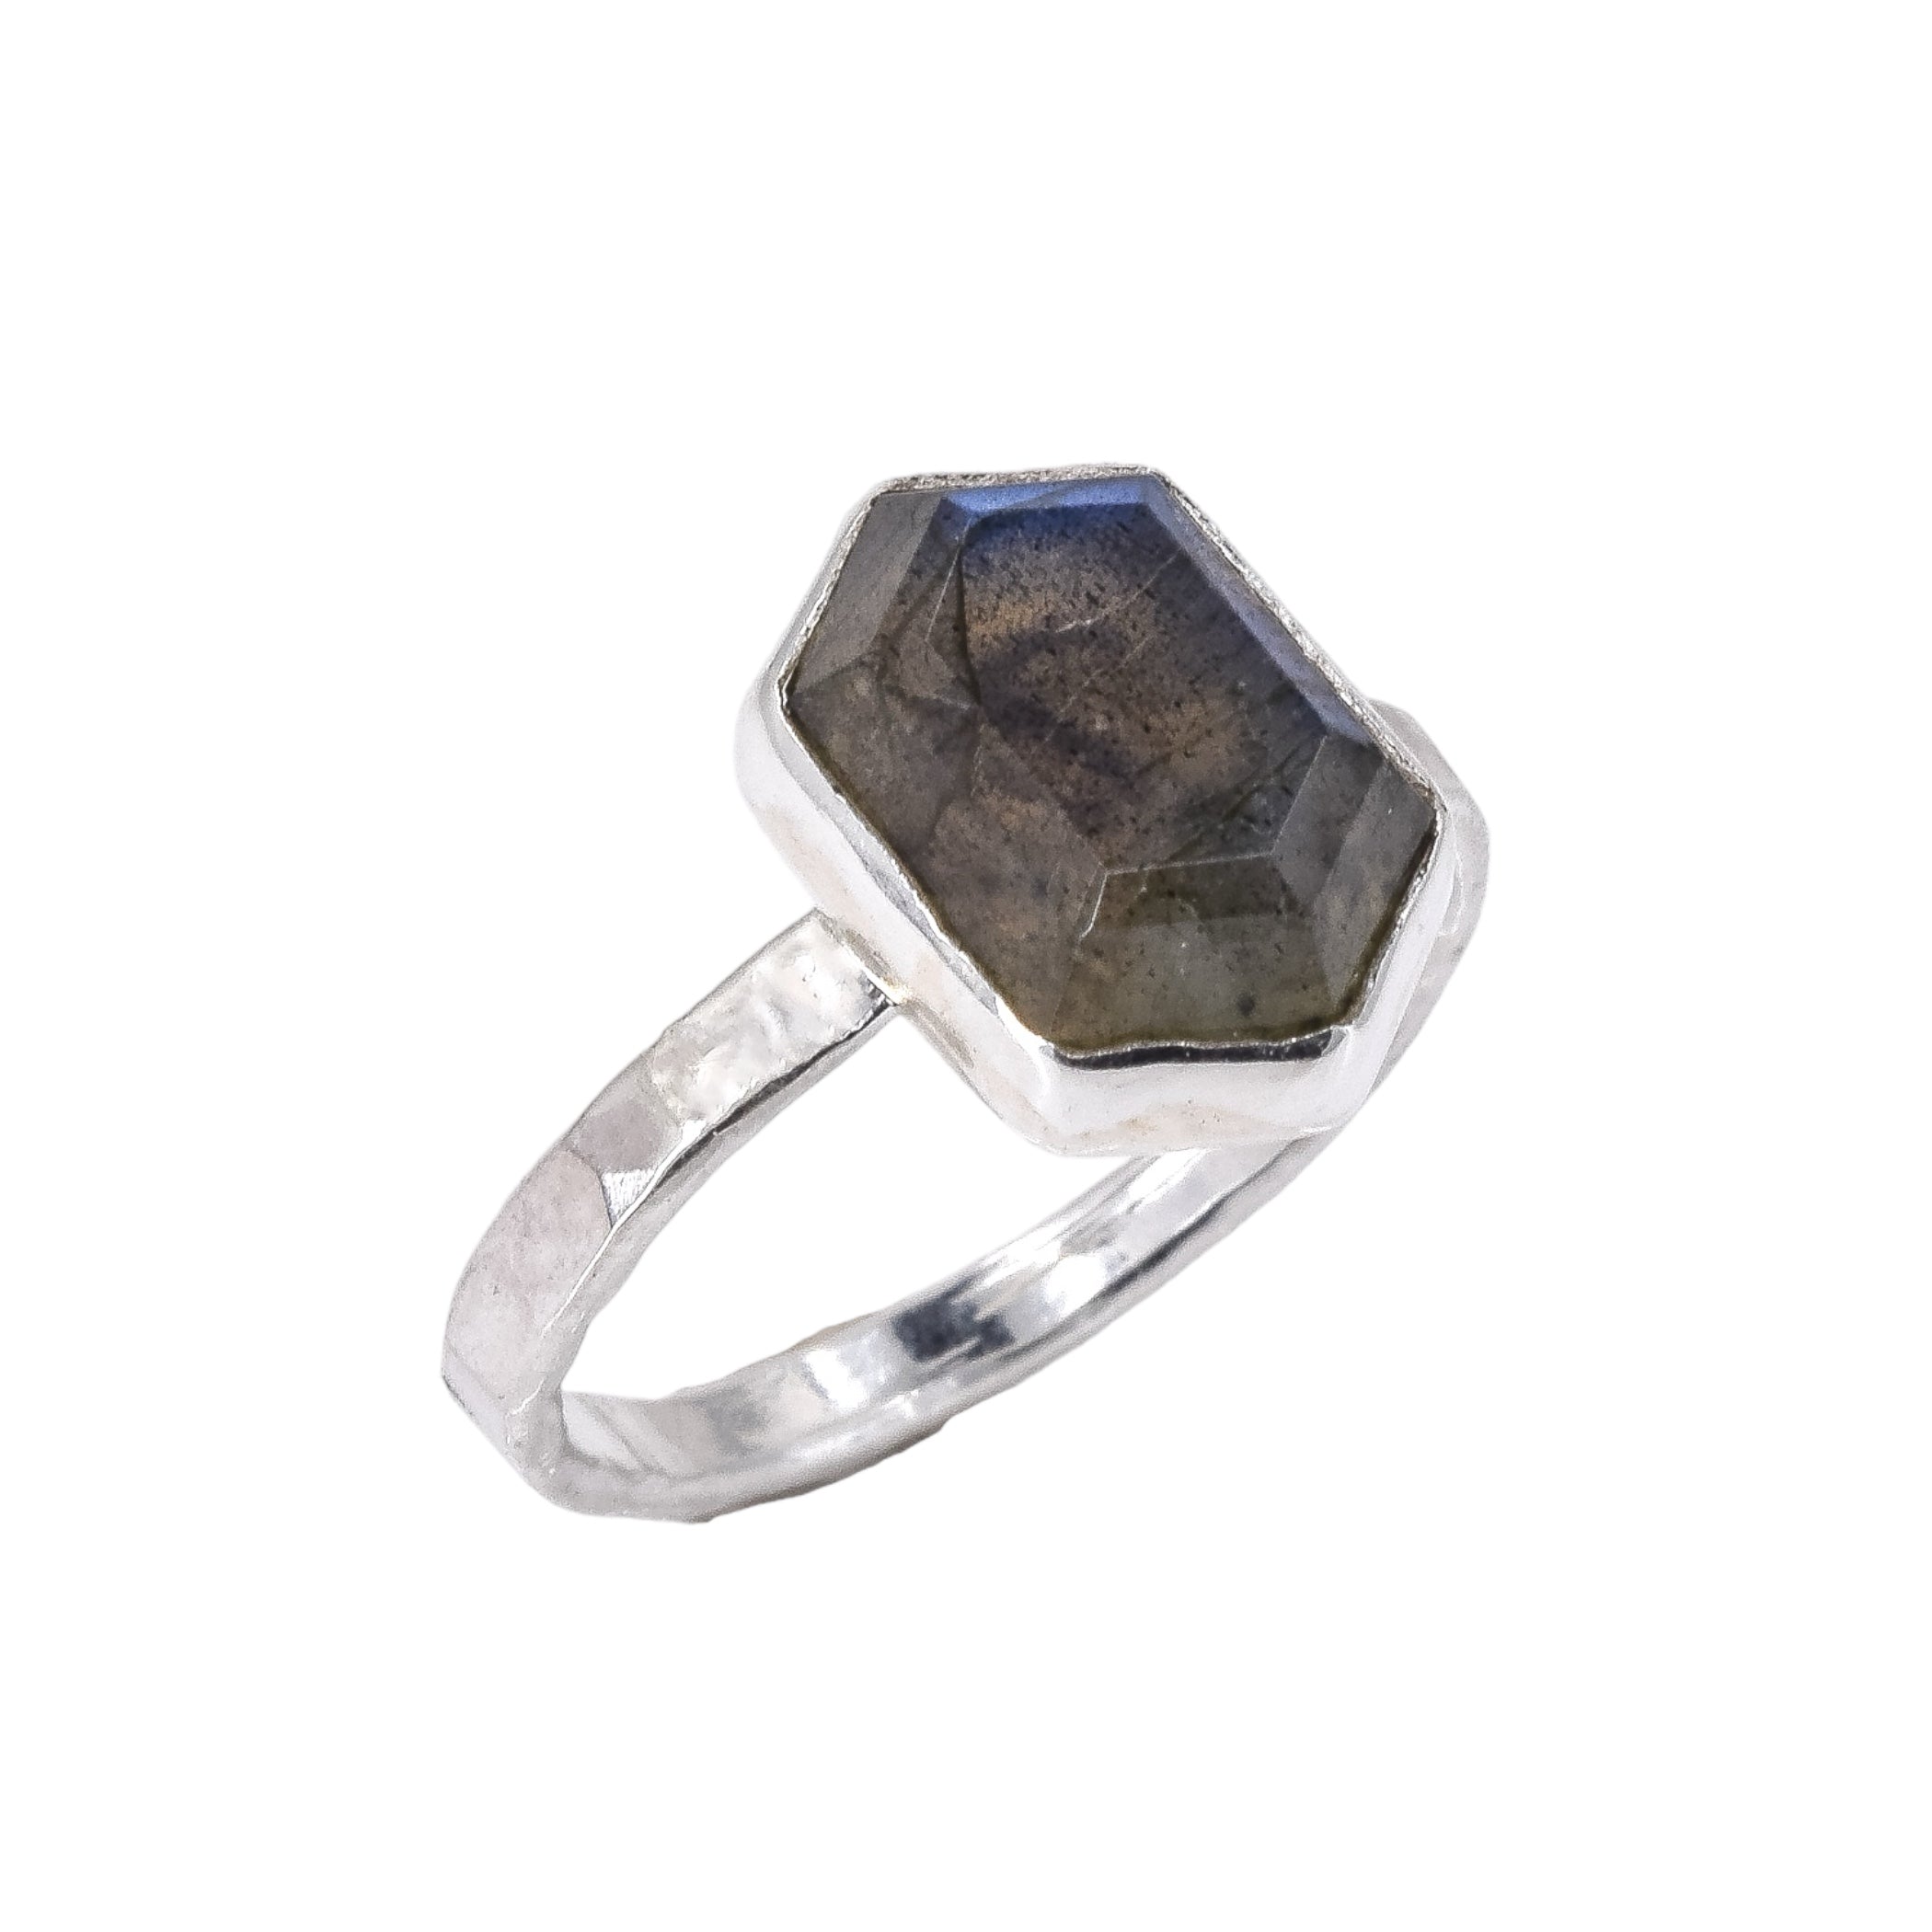 Stacking faceted sterling silver ring with a hexagonal shaped labradorite stone side view.